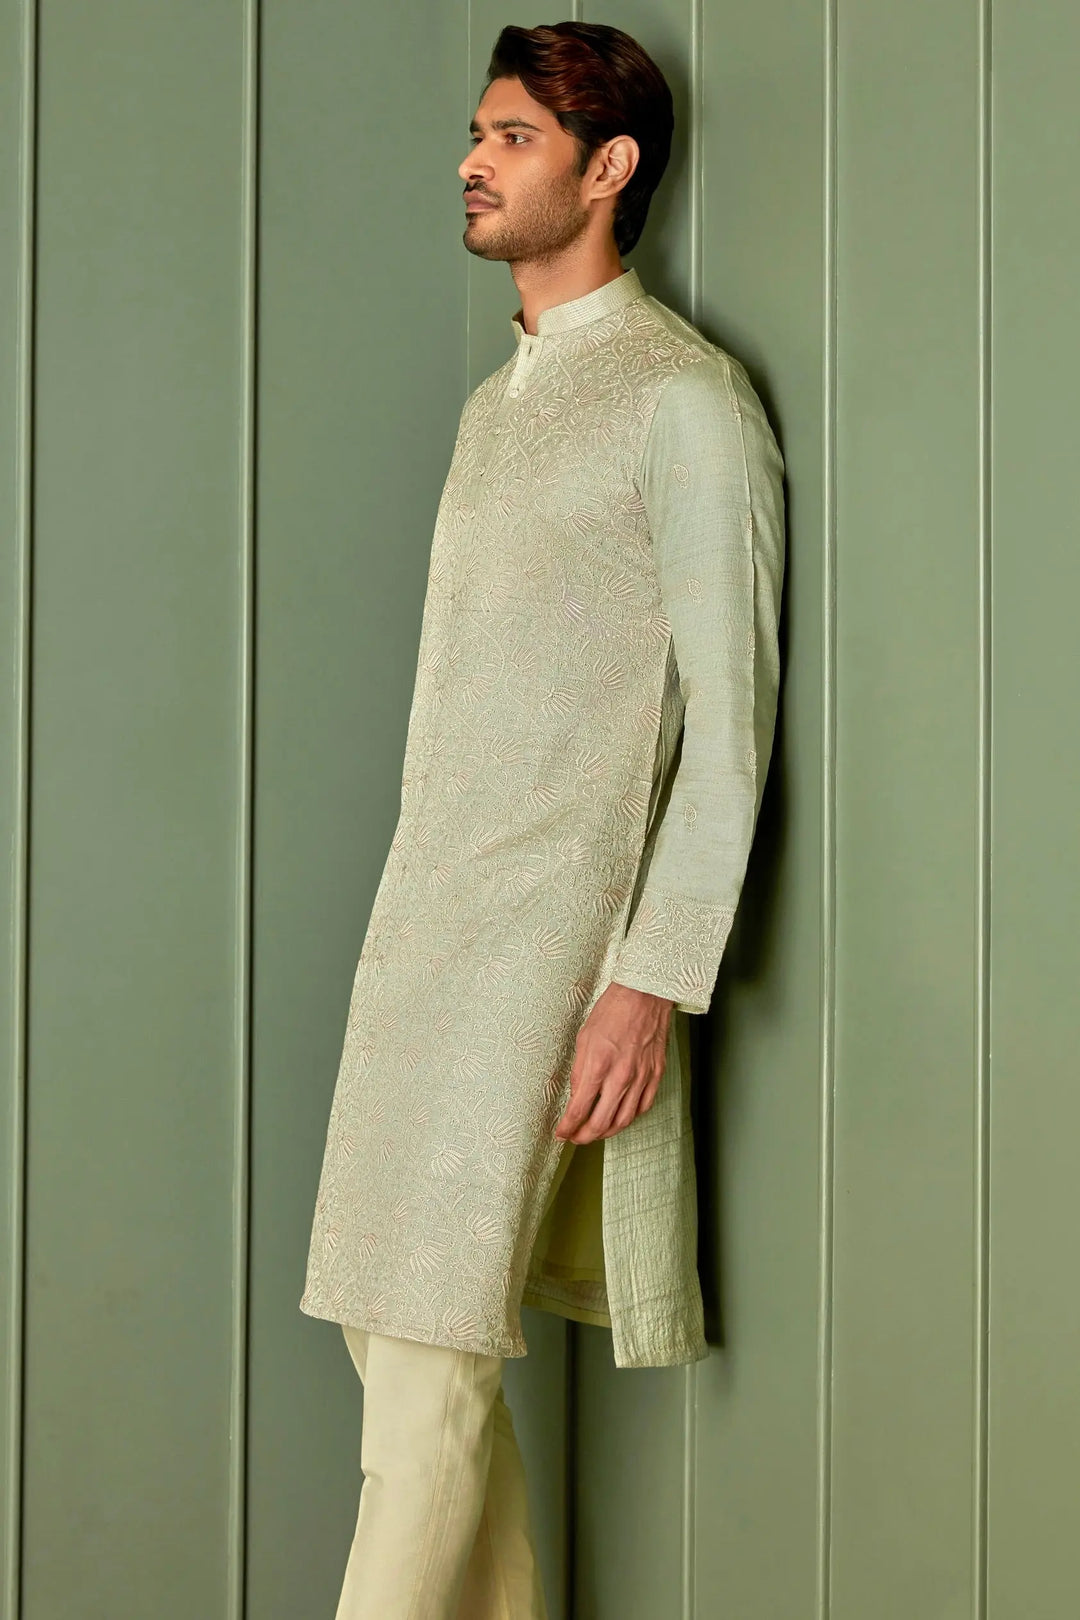 Olive Elegance: Tussar Silk Kurta with Resham Embroidery in Gold Floral and All Over Embroidery - Asuka Couture